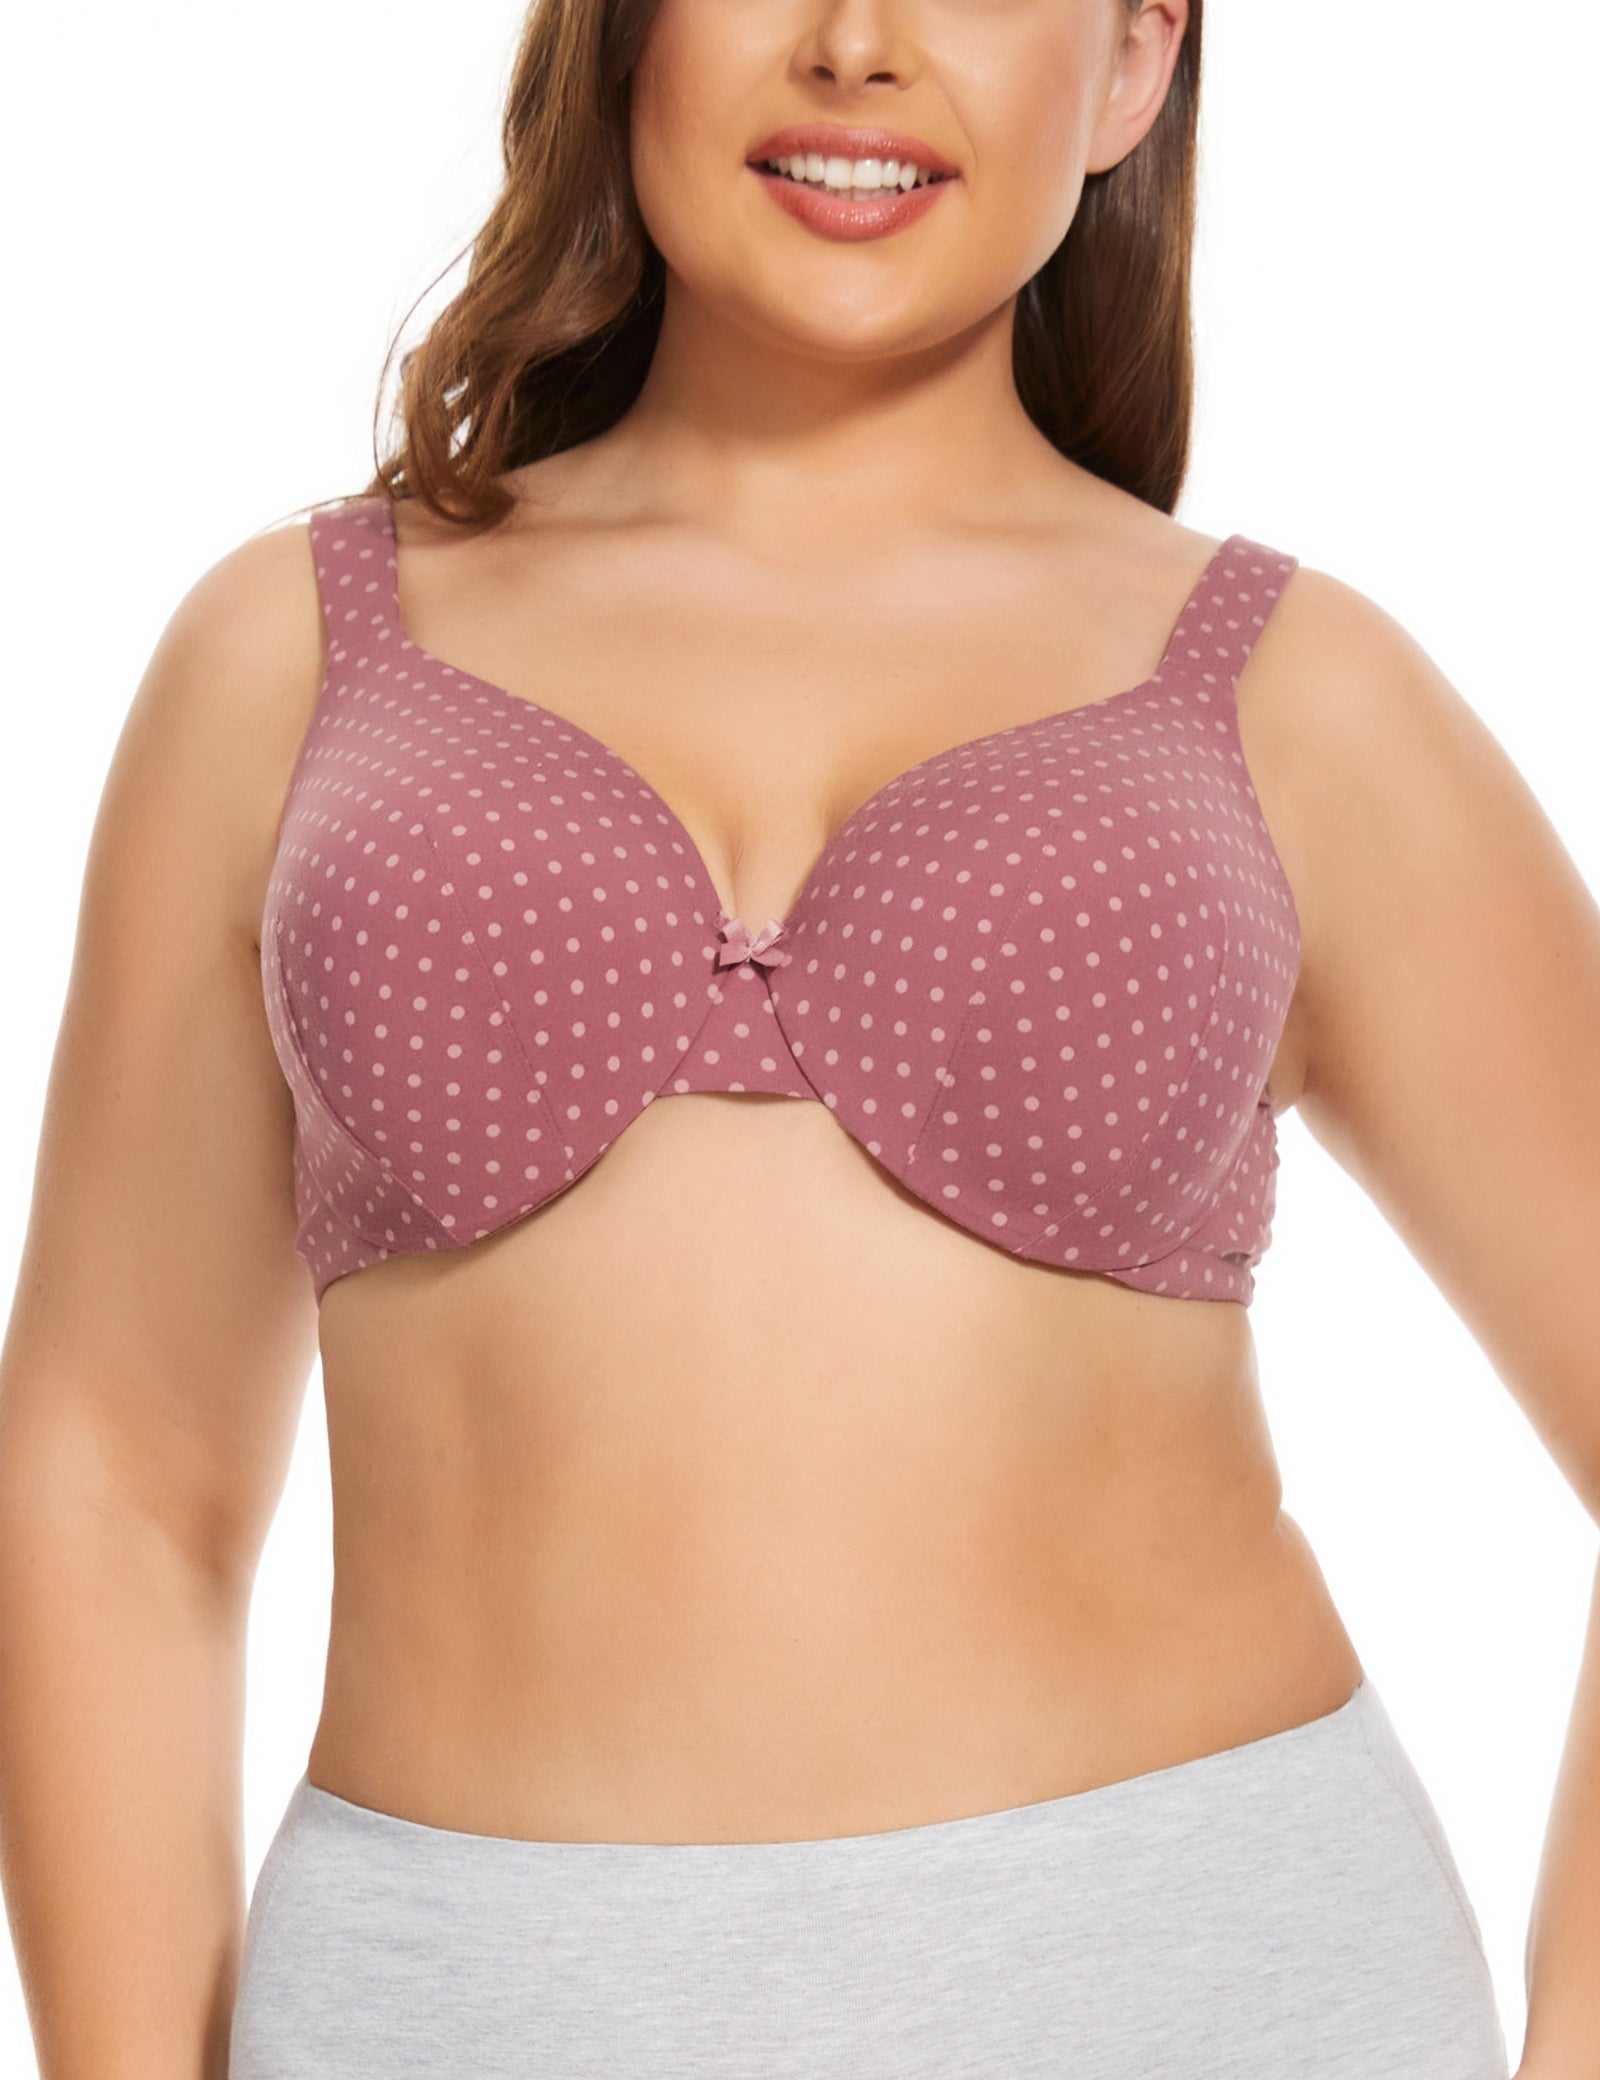 Buy BAICLOTHING Plus Size Women's Smooth Seamless Full Coverage Underwire  Non Padded Back Closure Lace Bra 32~48 C DD E F G H Skin Cup Size G Bands  Size 36 at